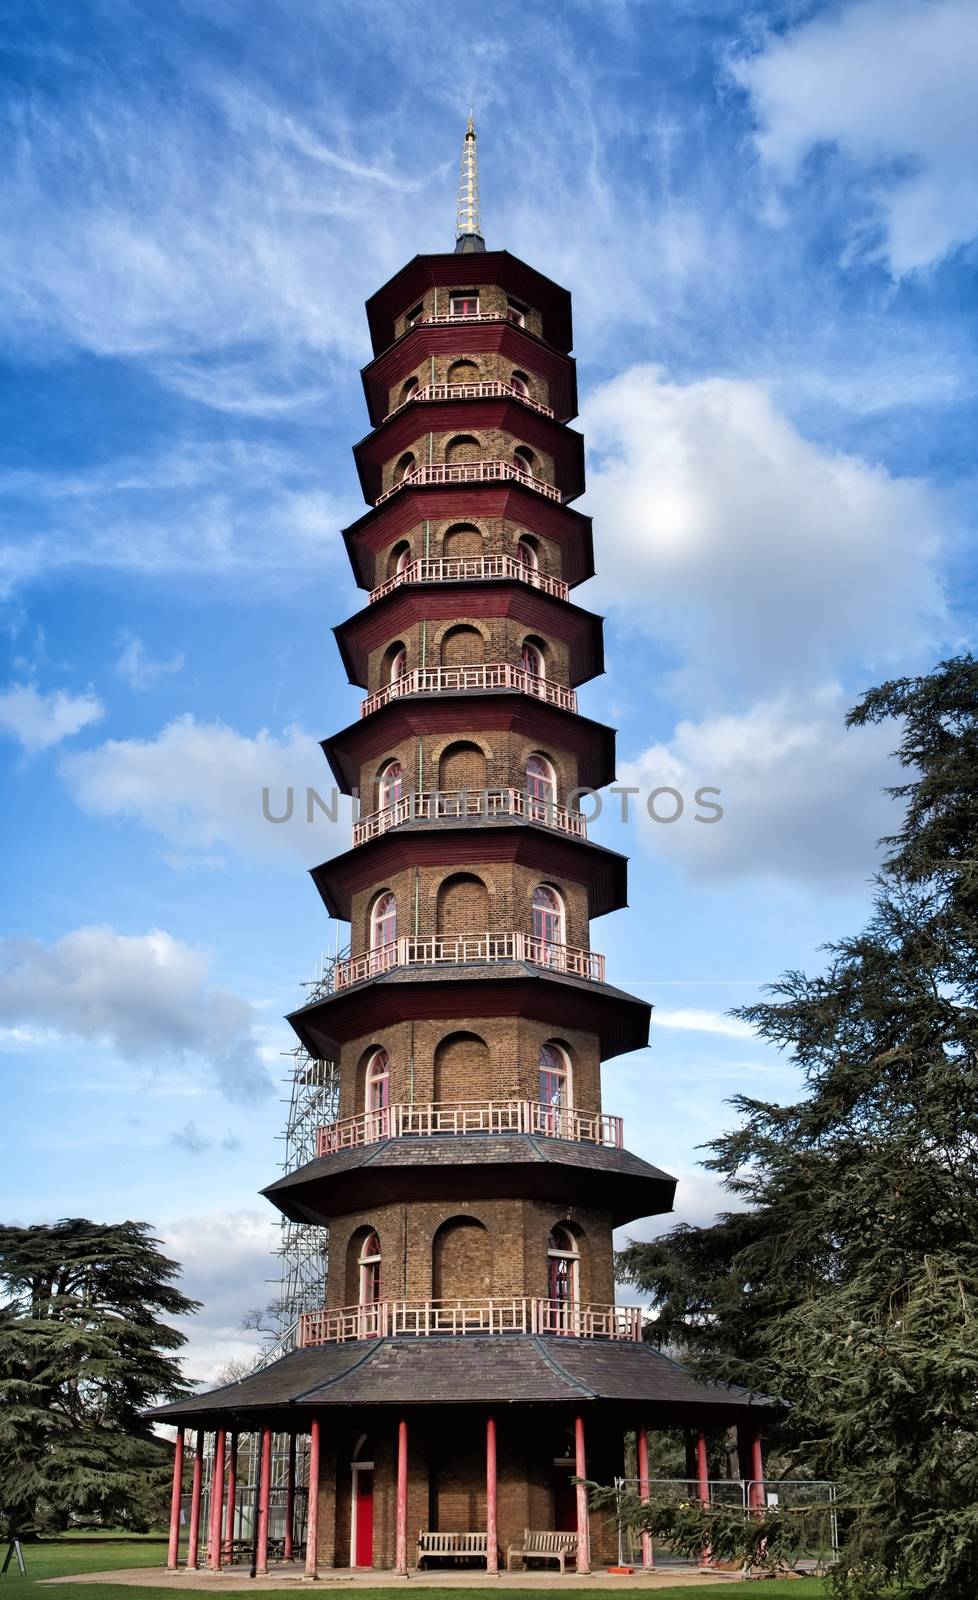 The Chinese pagoda in Kew Gardens in London by mitakag